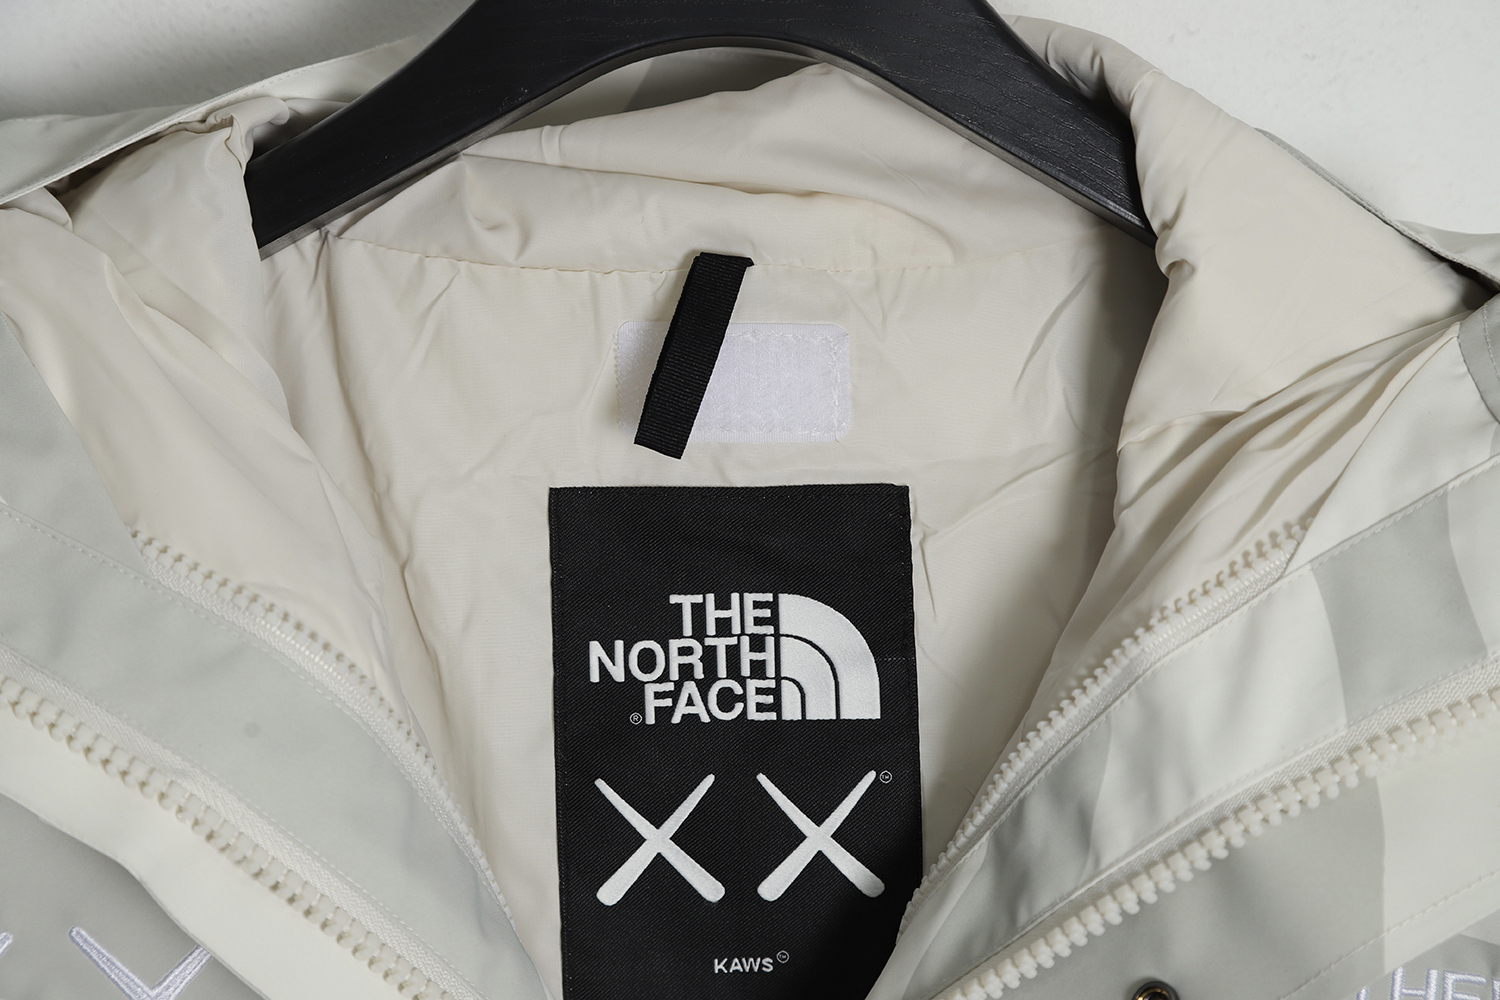 THE NORTH FACE x XX KAWS joint FW22 outdoor color matching hard shell hooded jacket